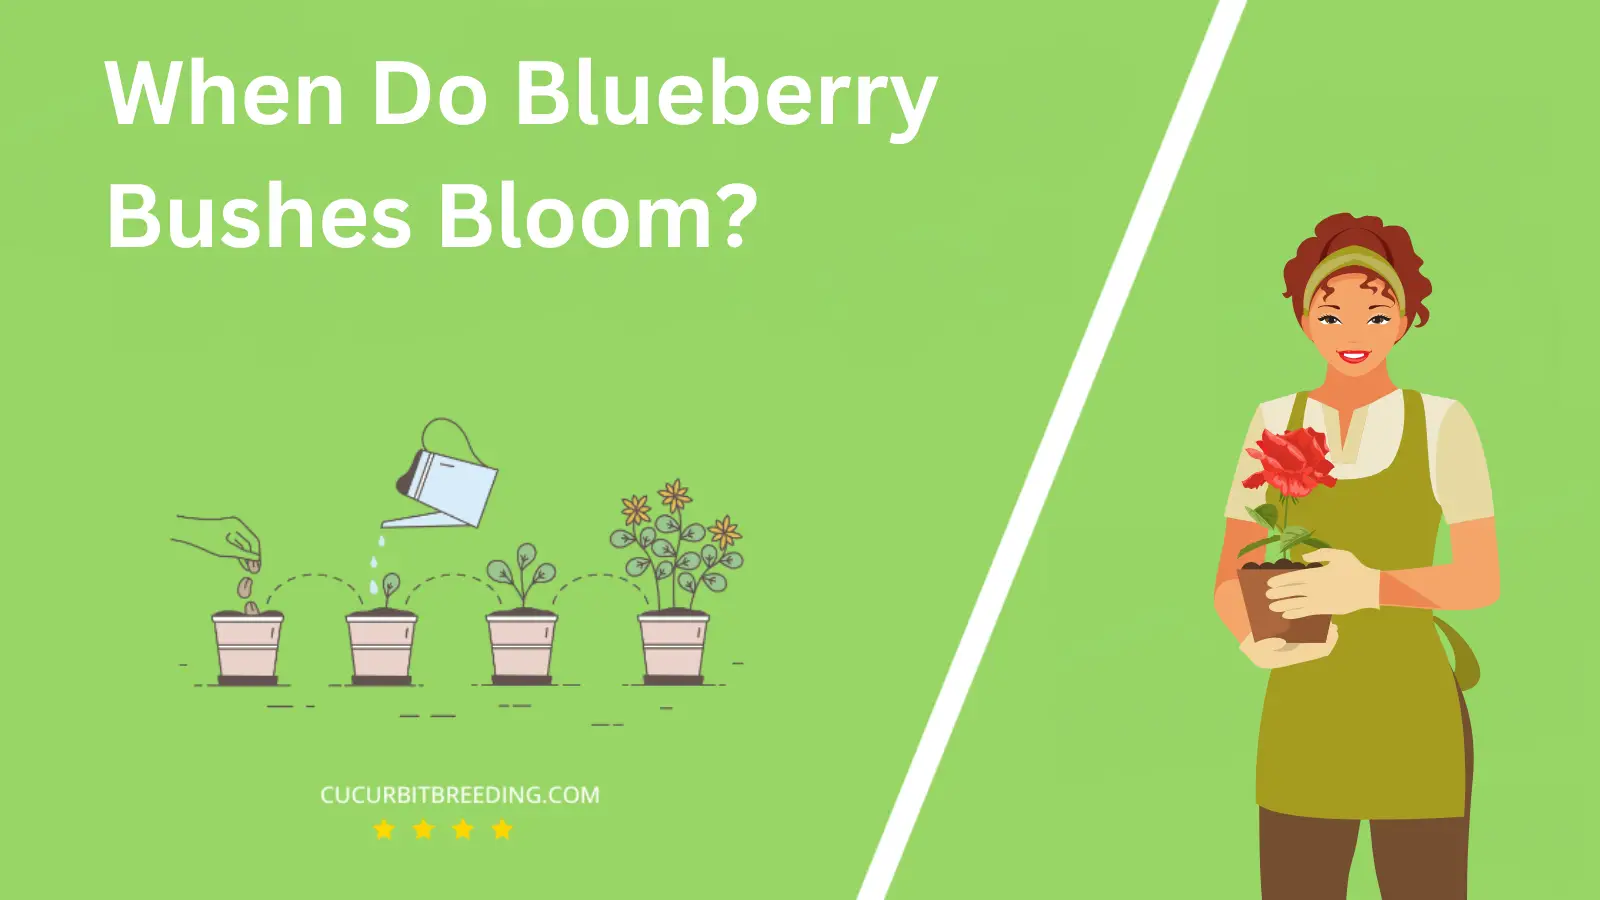 When Do Blueberry Bushes Bloom?